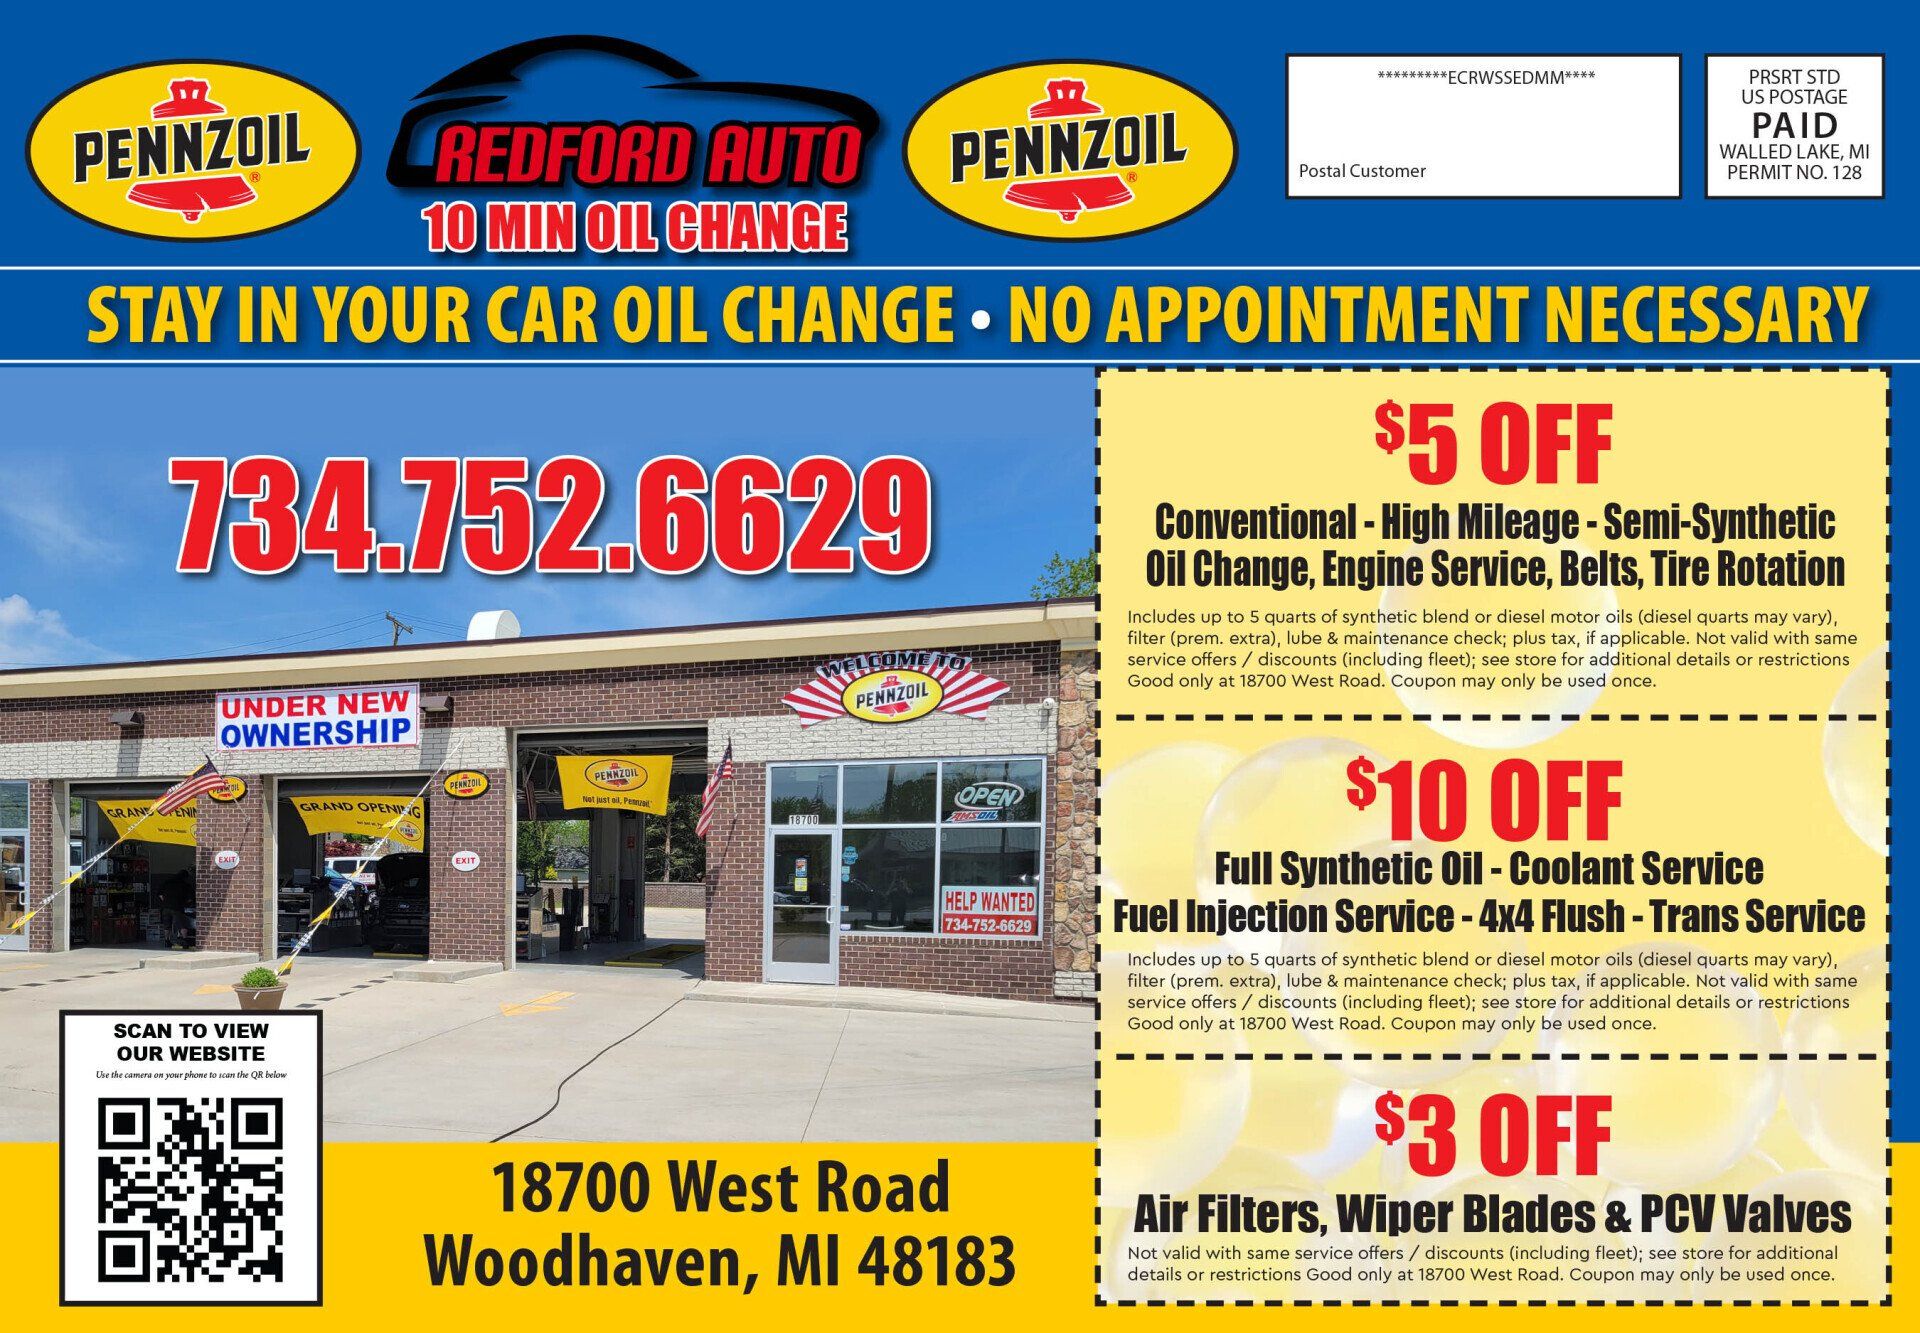 A flyer for redford auto in woodhaven mi